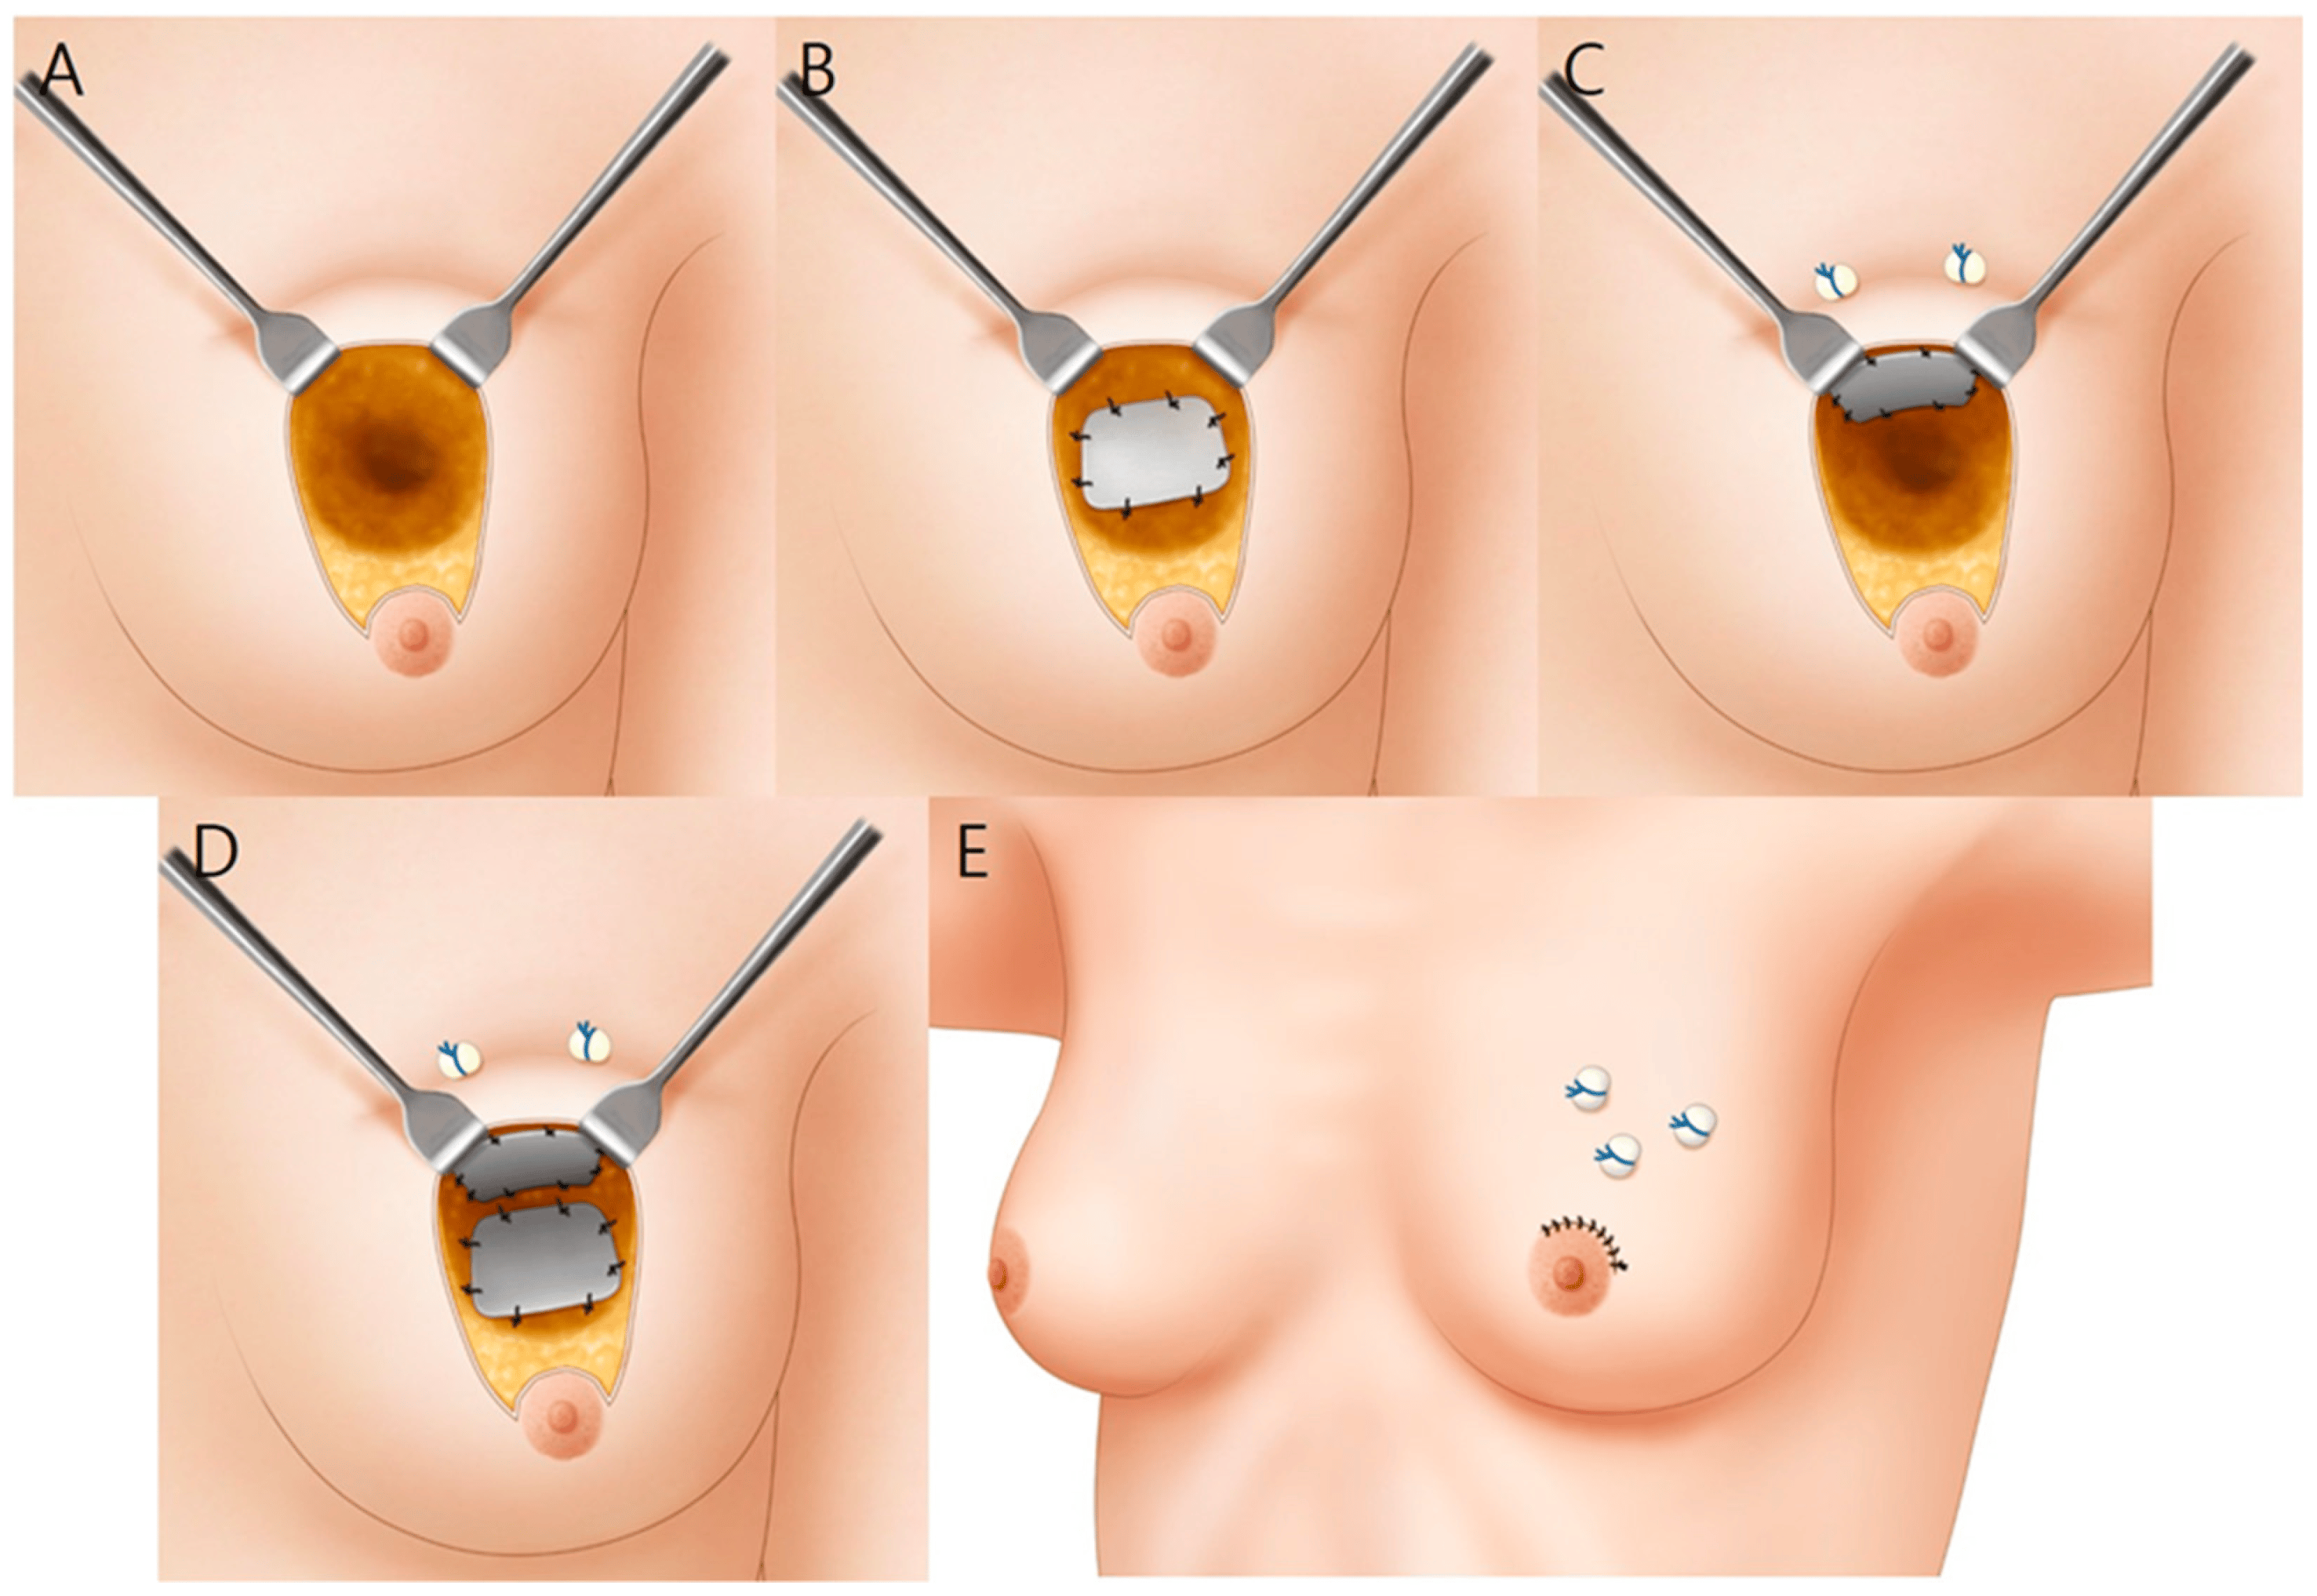 Types of Cysts in the Breast